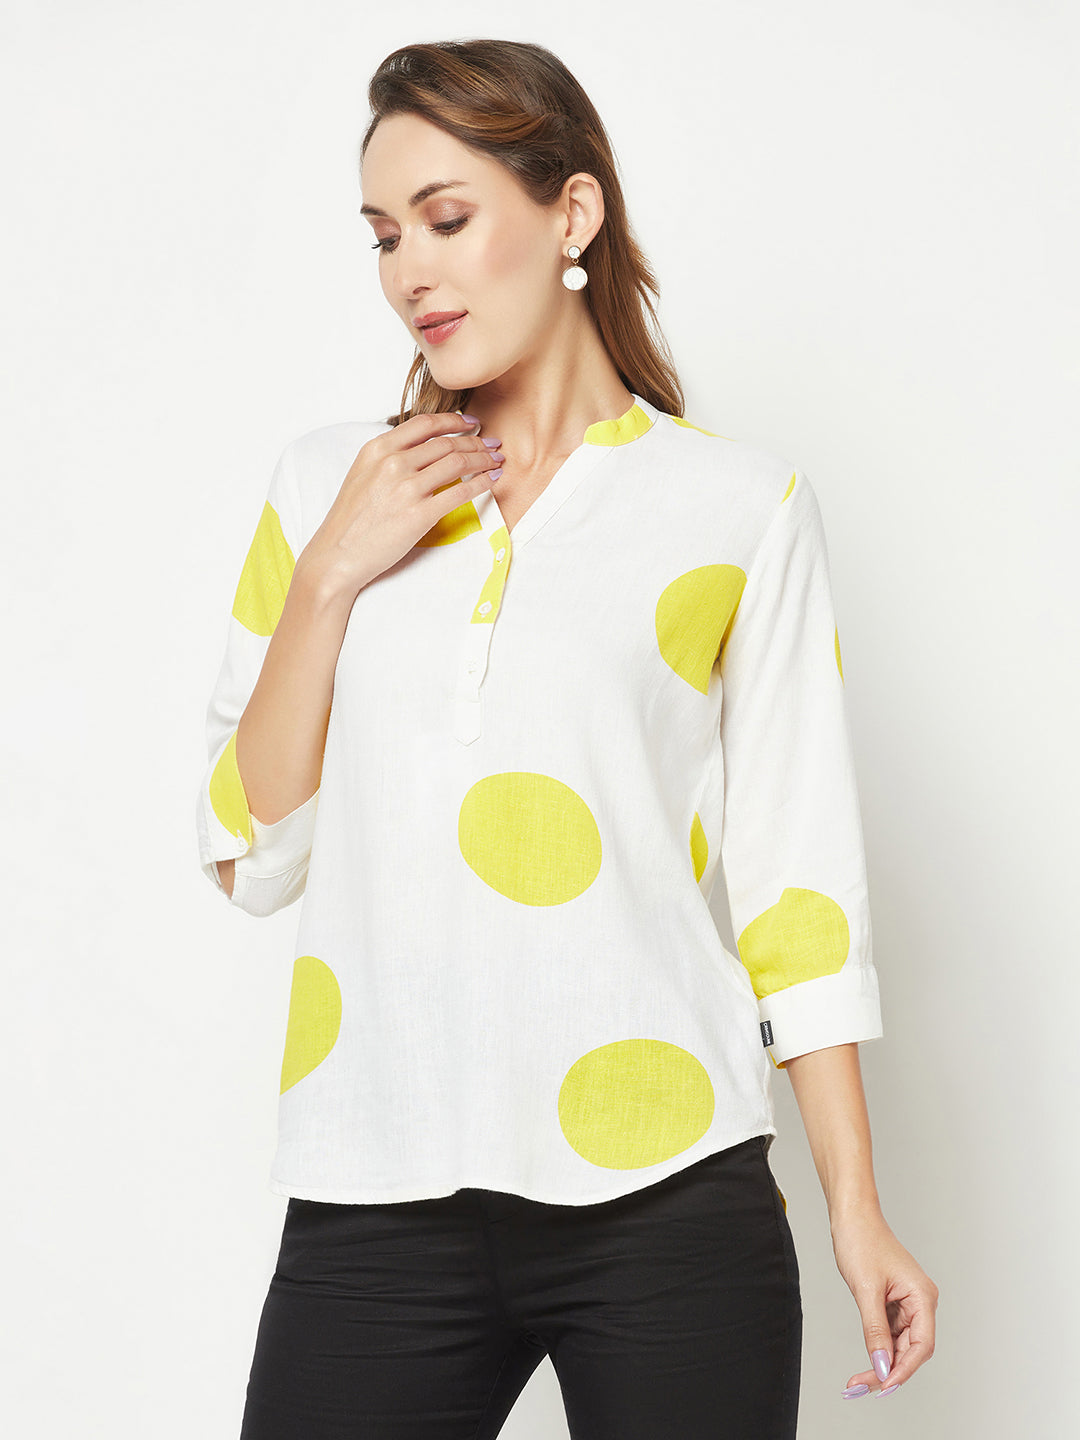  Yellow Polka-Dotted Top